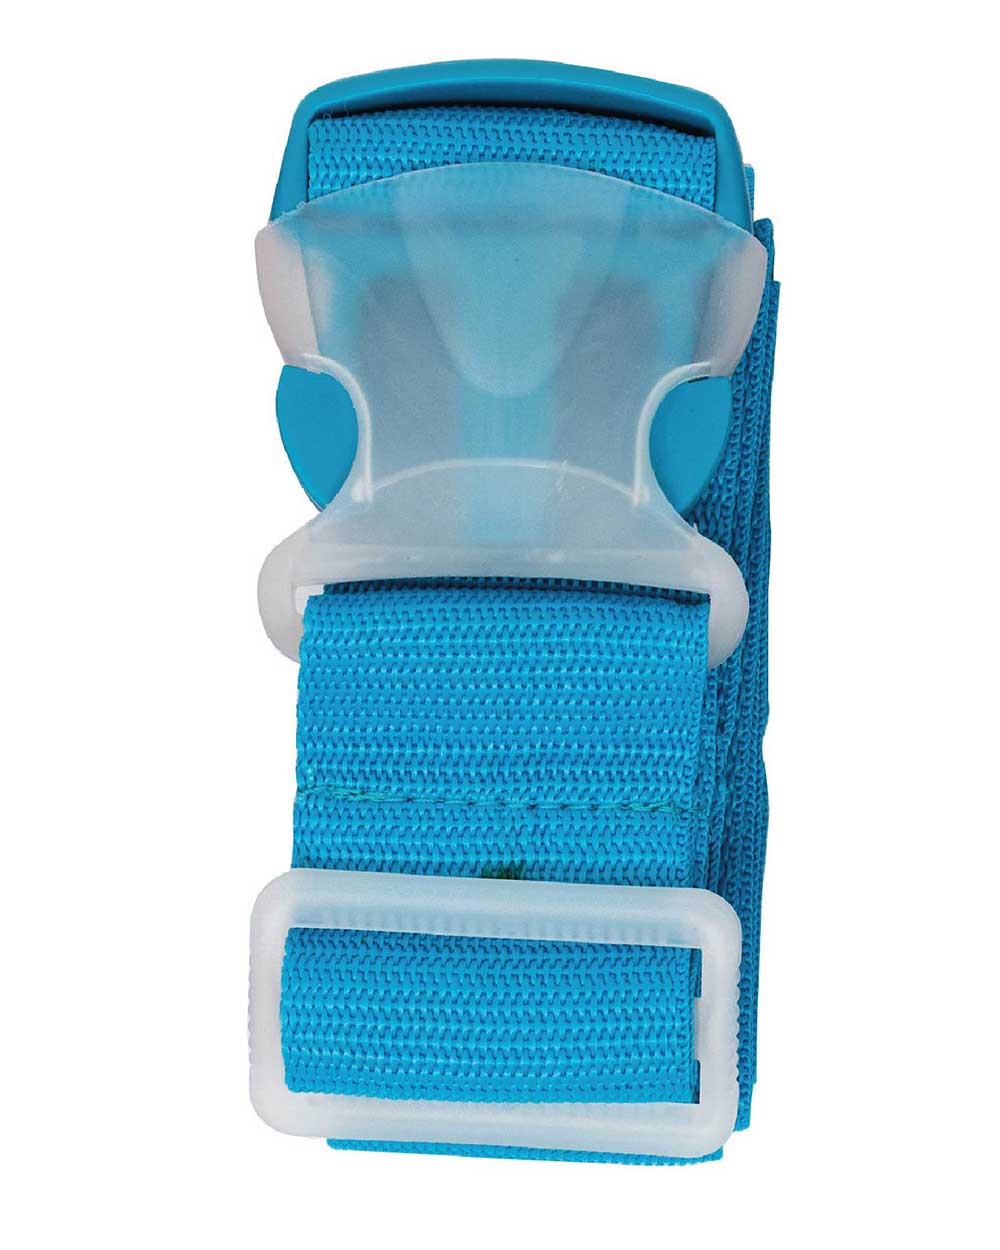 Luggage Strap Adjustable Belt Suitcase Blue without packaging on a white back ground